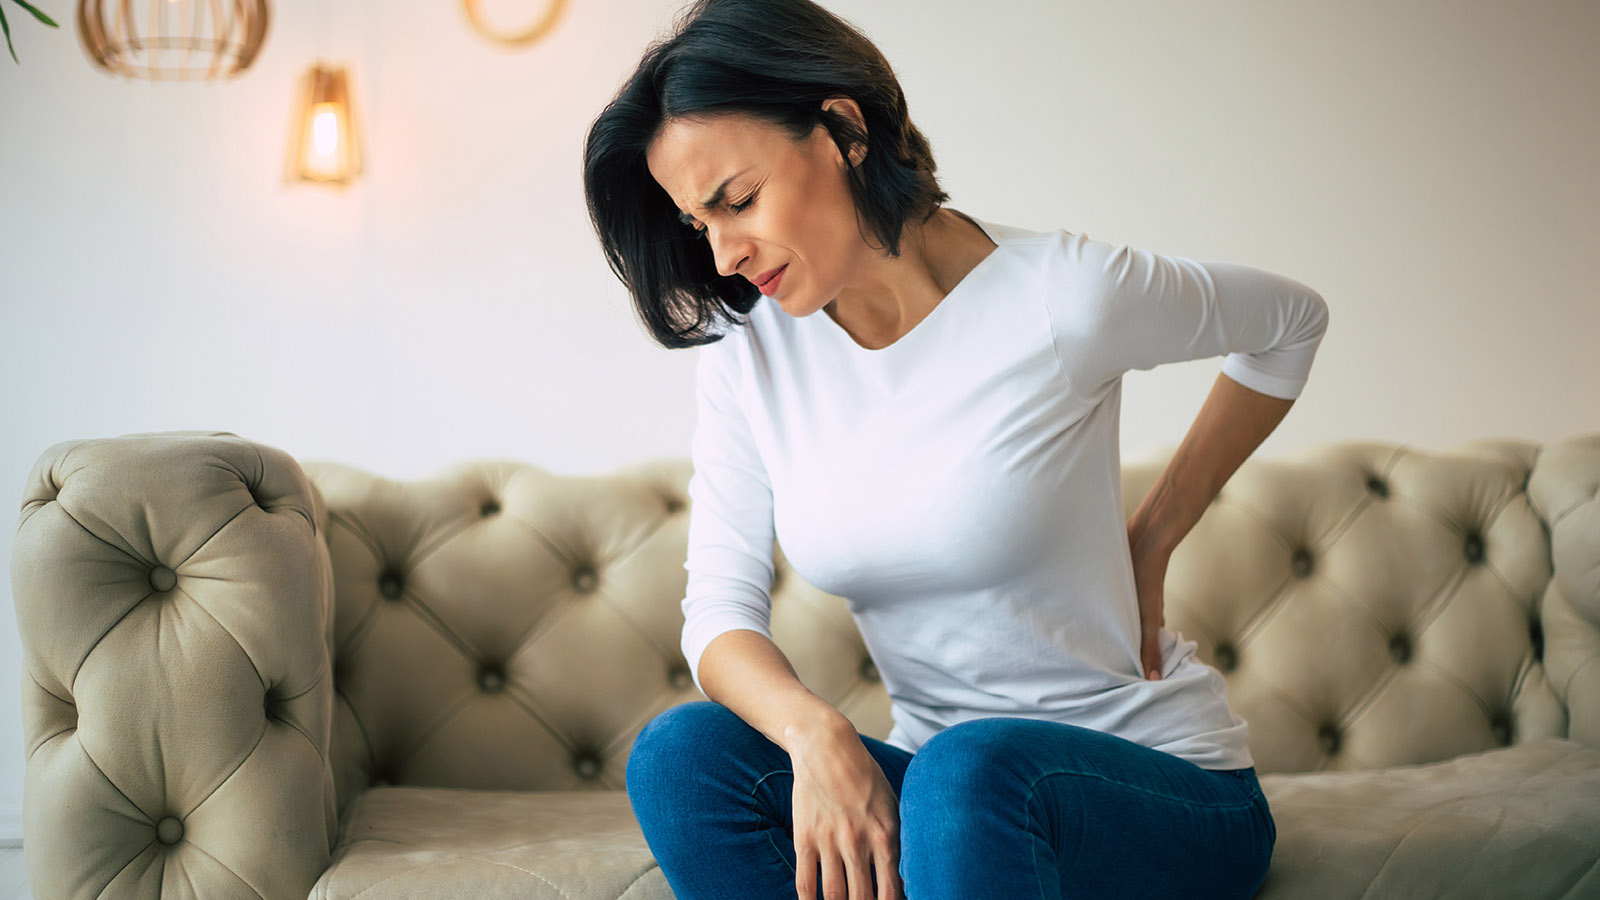 Back pain: What causes it and how to feel better